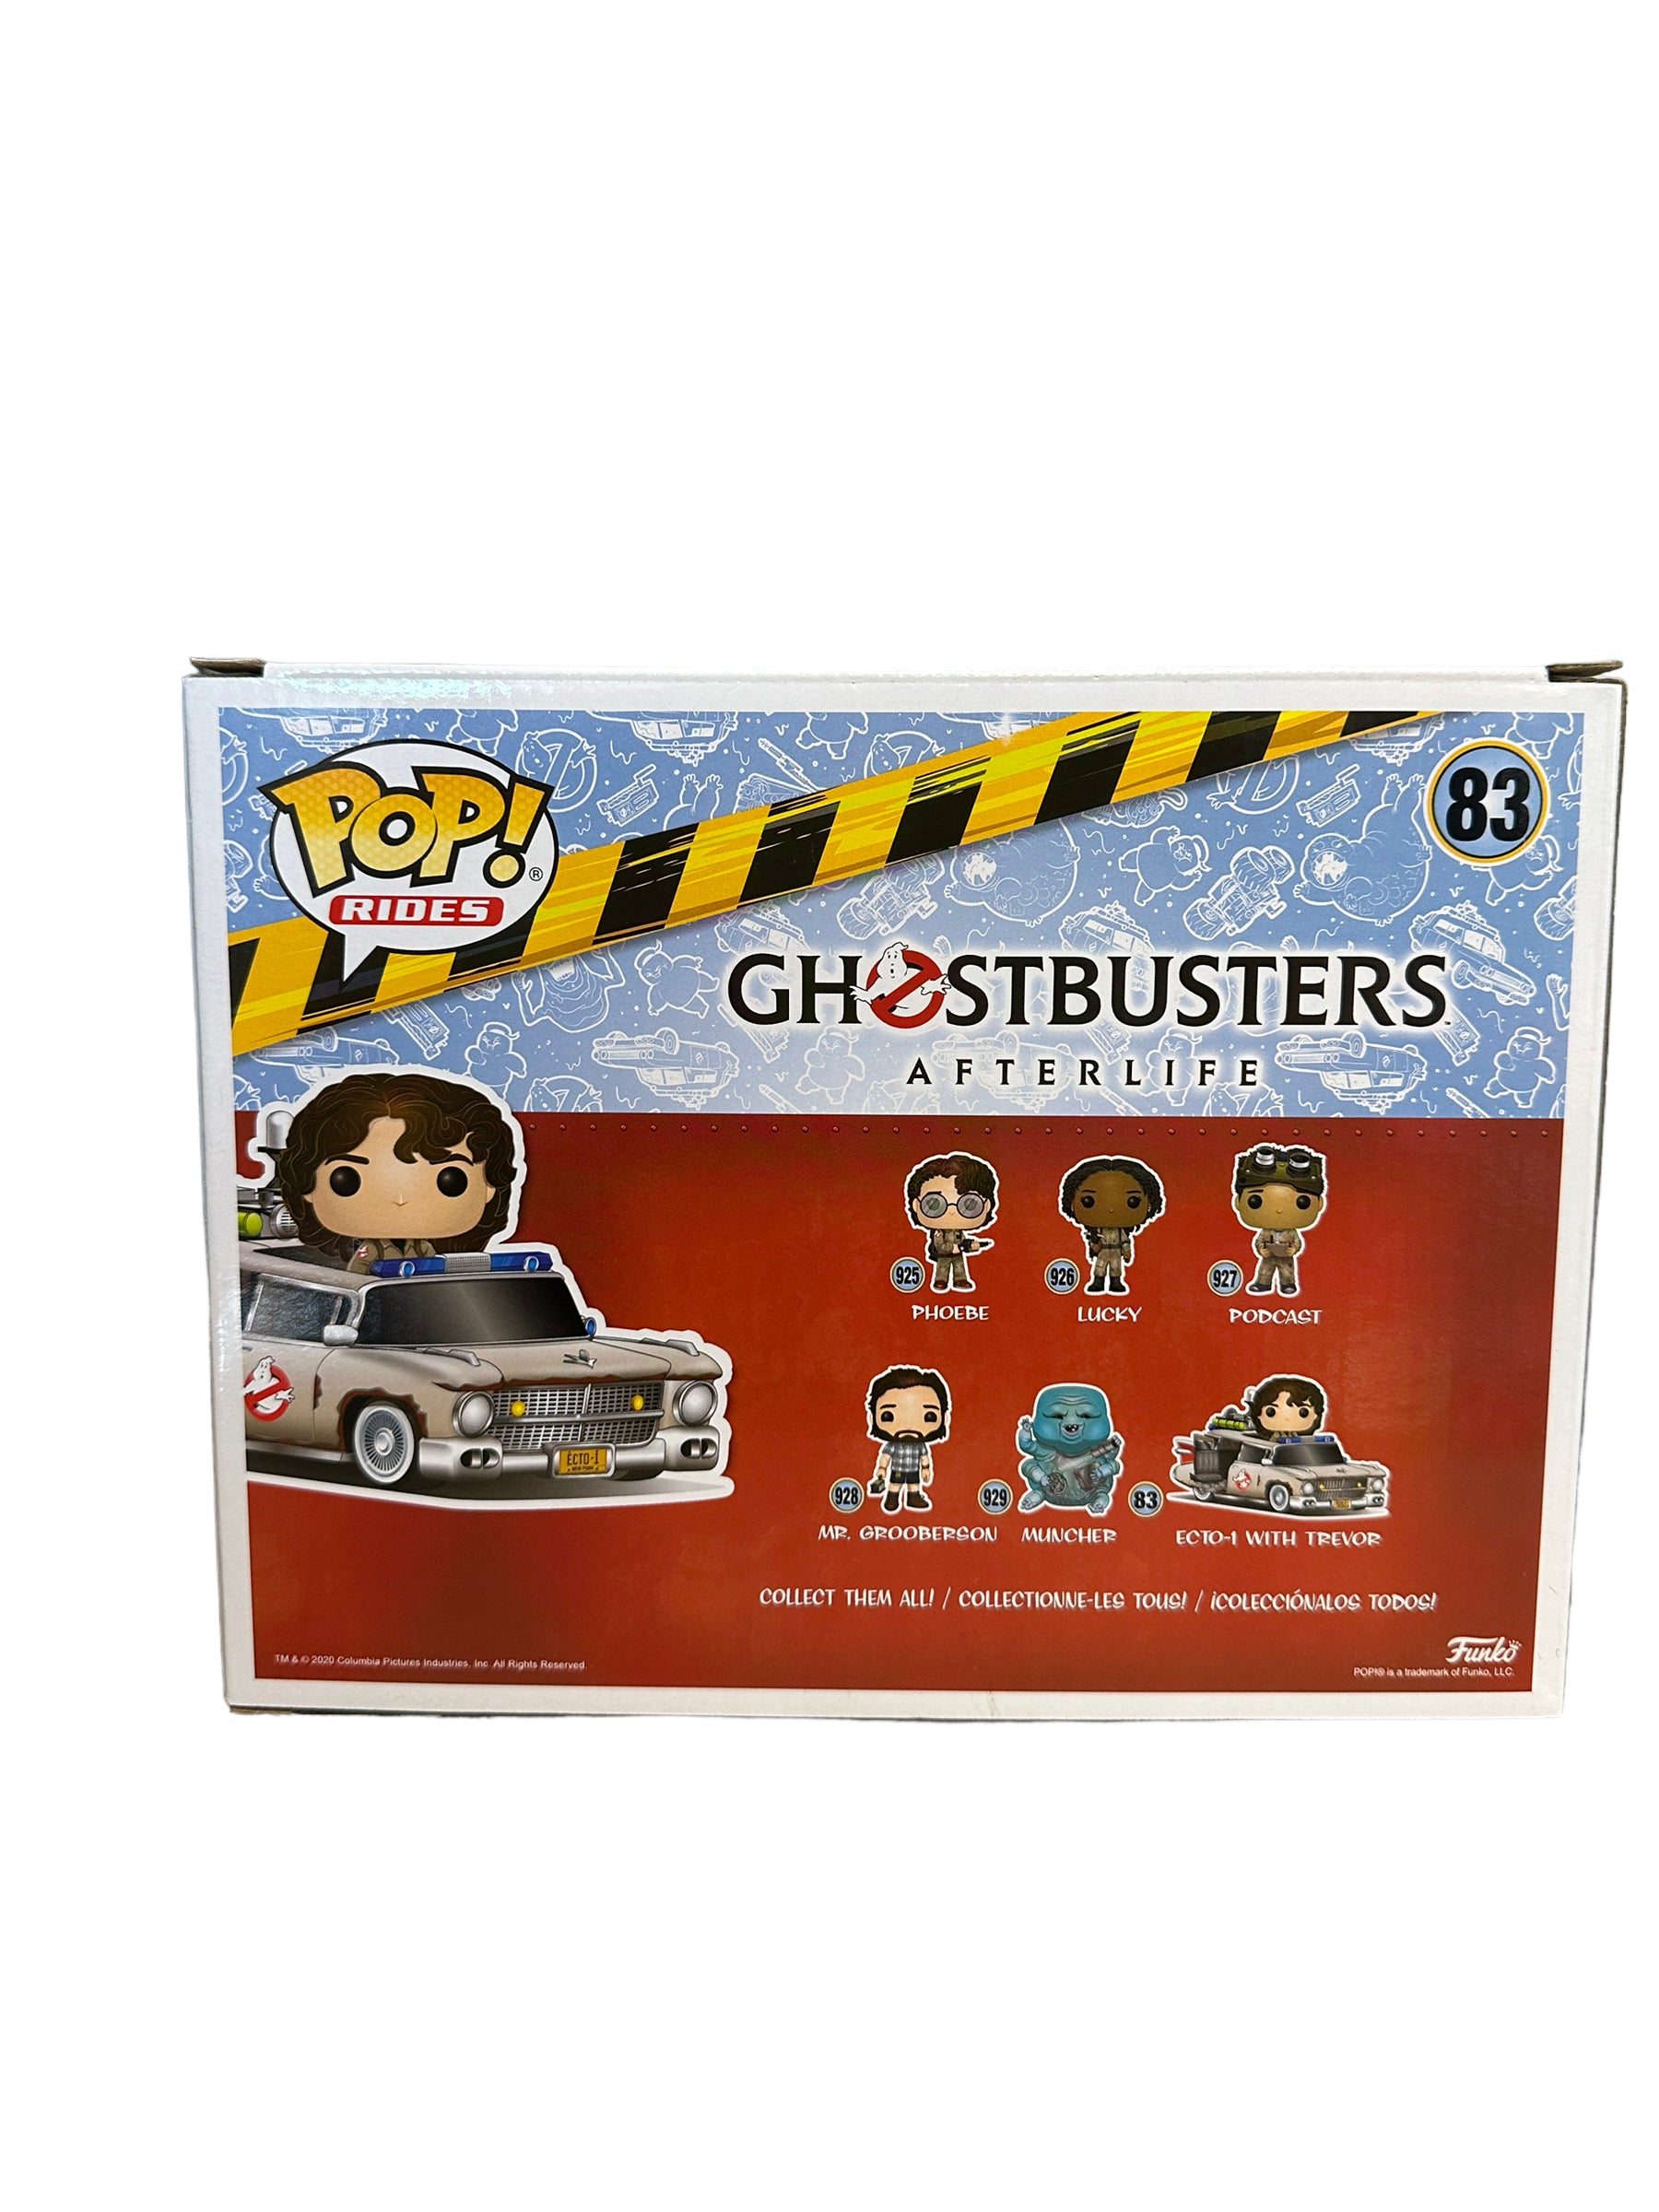 Ecto-1 with Trevor #83 Funko Pop Ride! - Ghostbusters Afterlife - 2020 Pop!  - Condition 8.5/10